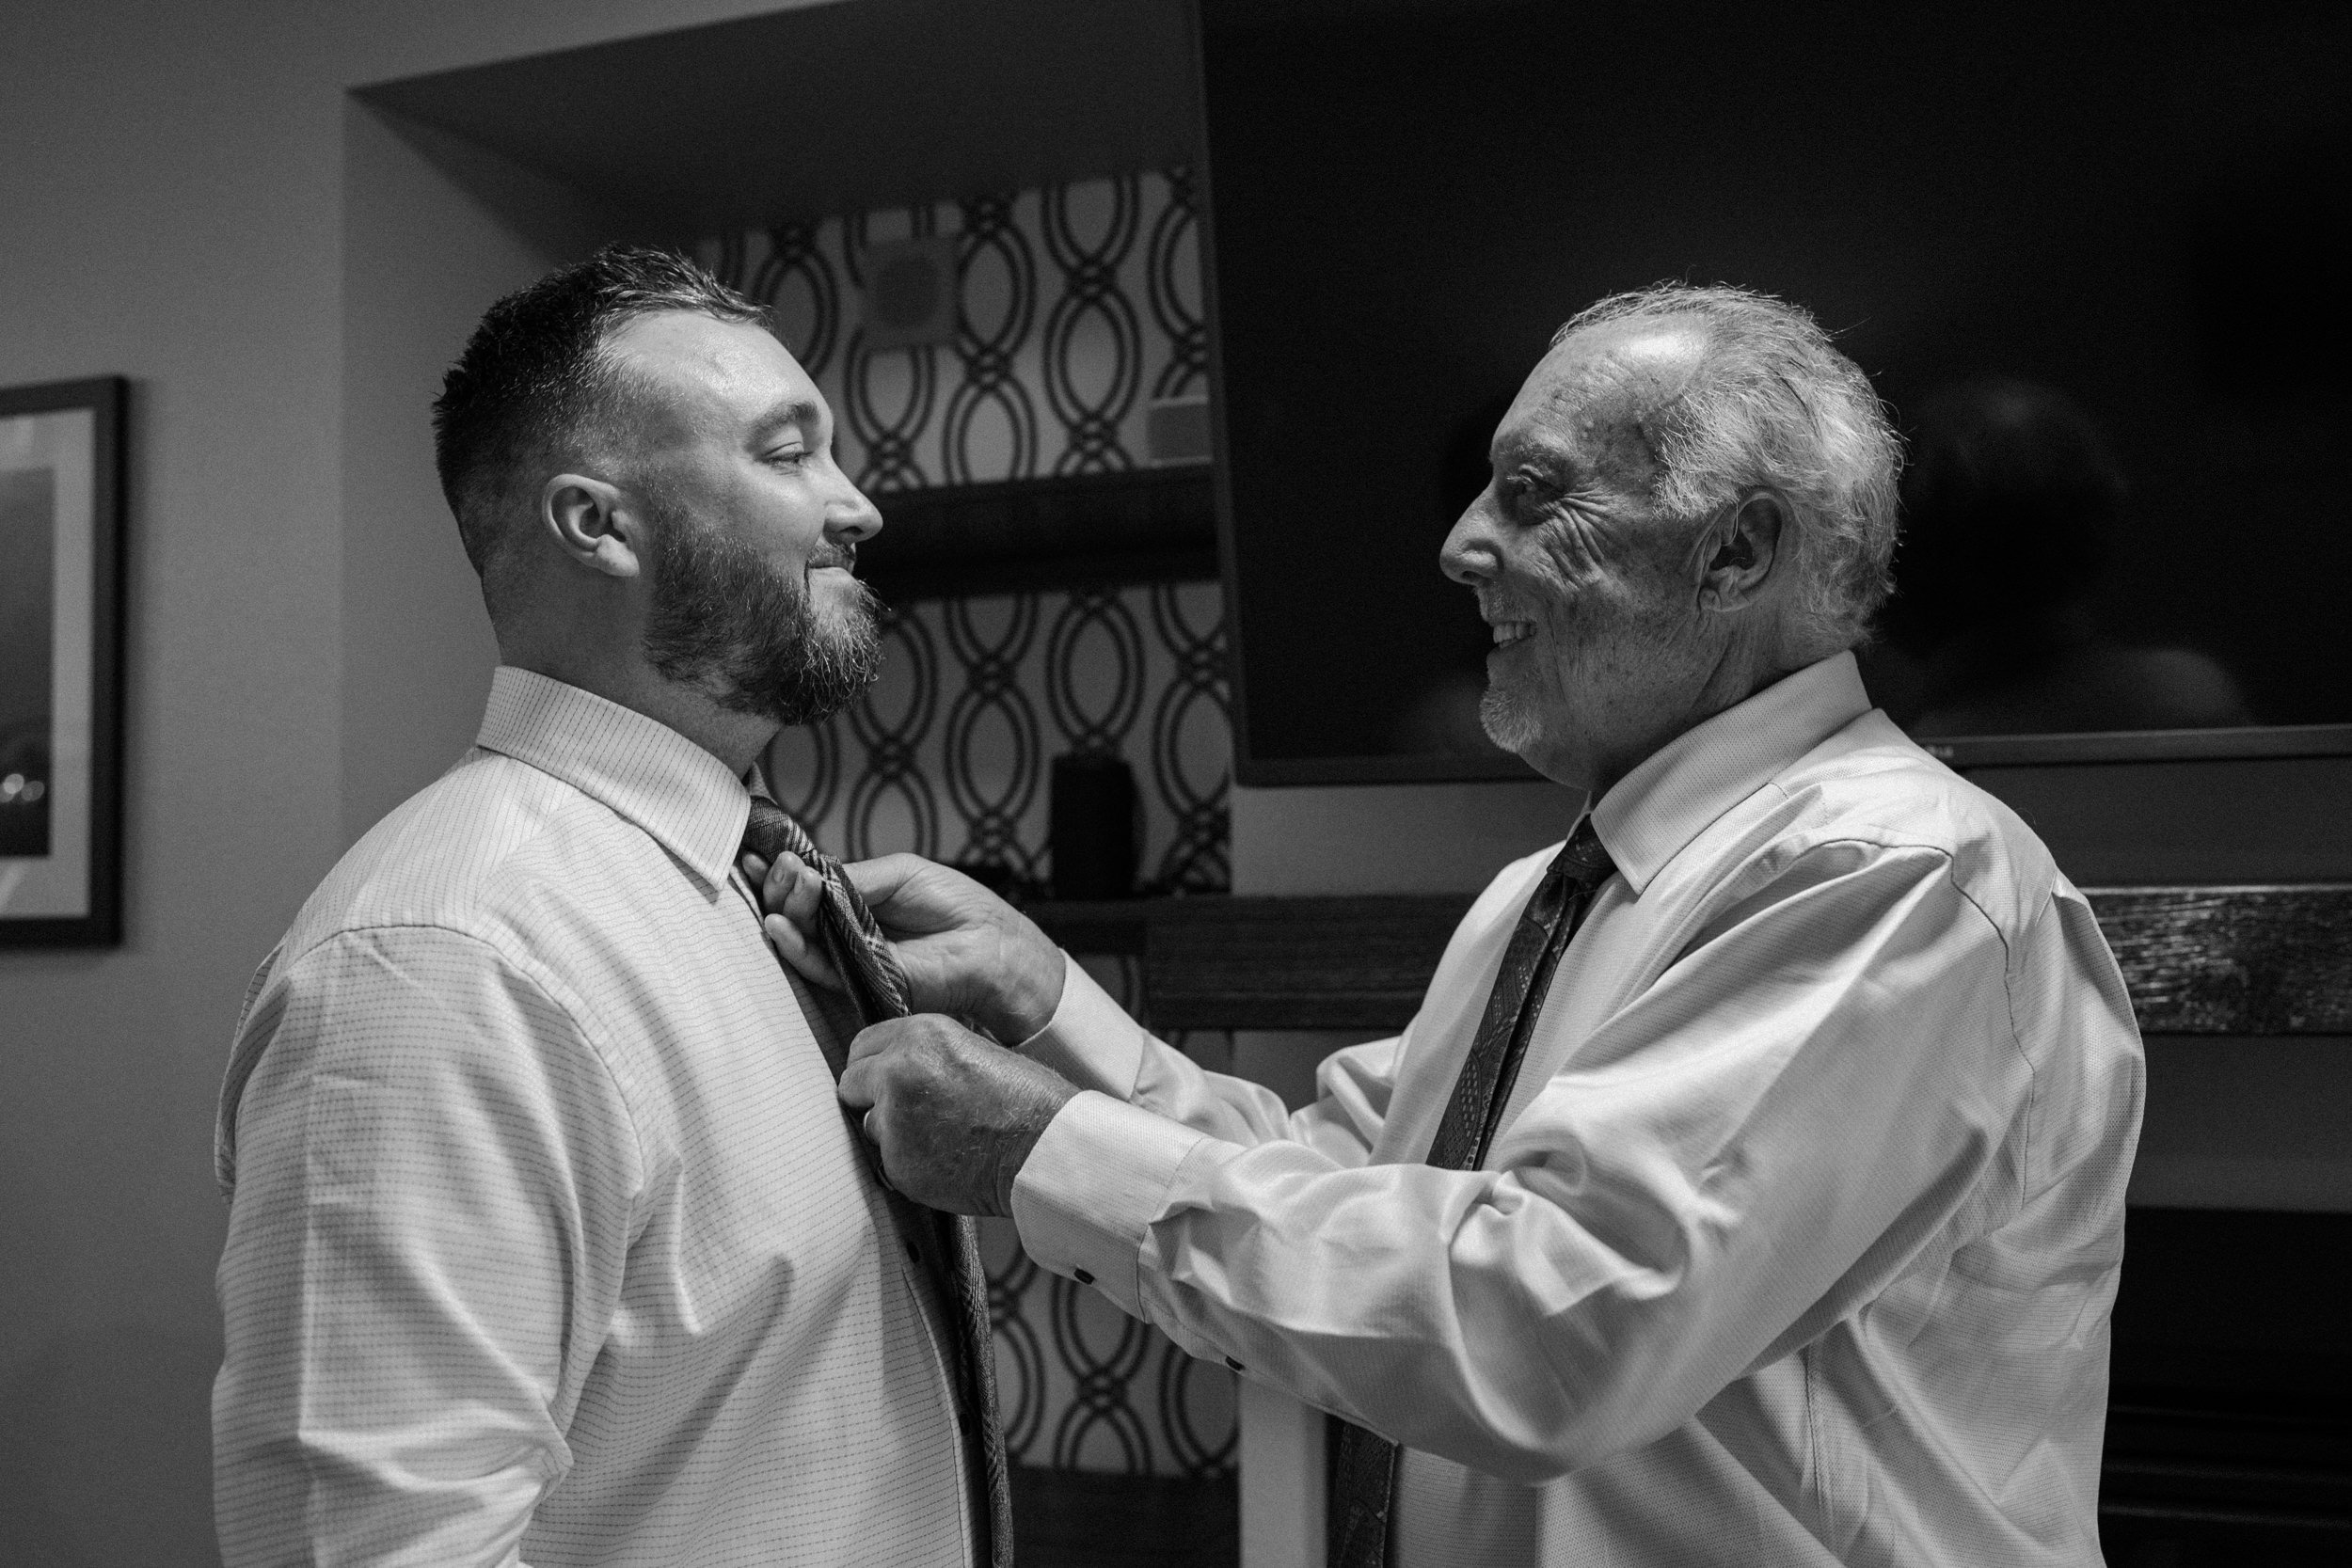 Father of the groom helps adjust his tie